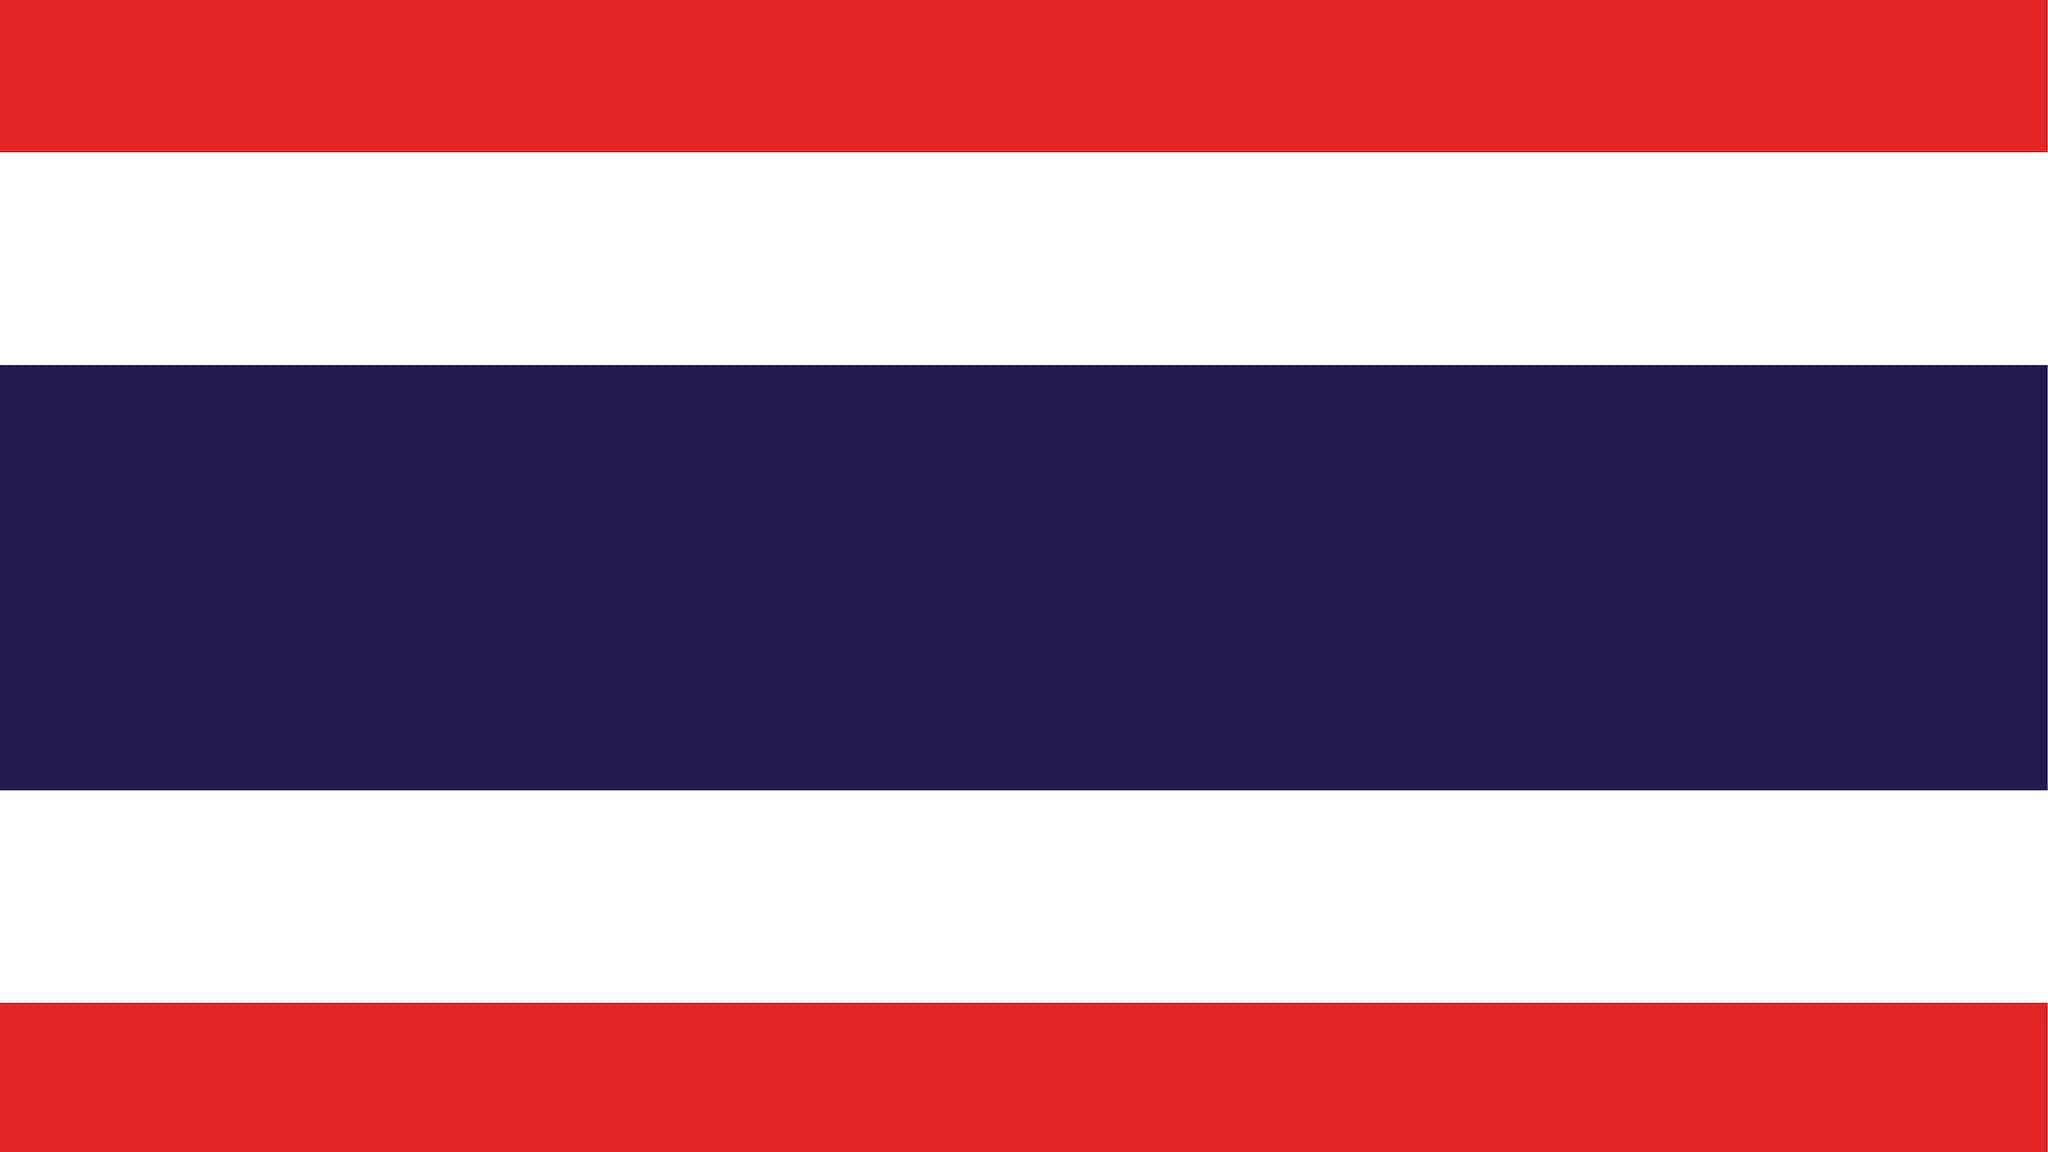 Flag of Thailand. Five horizontal bands in order from top to bottom (red, white, blue, white, red).